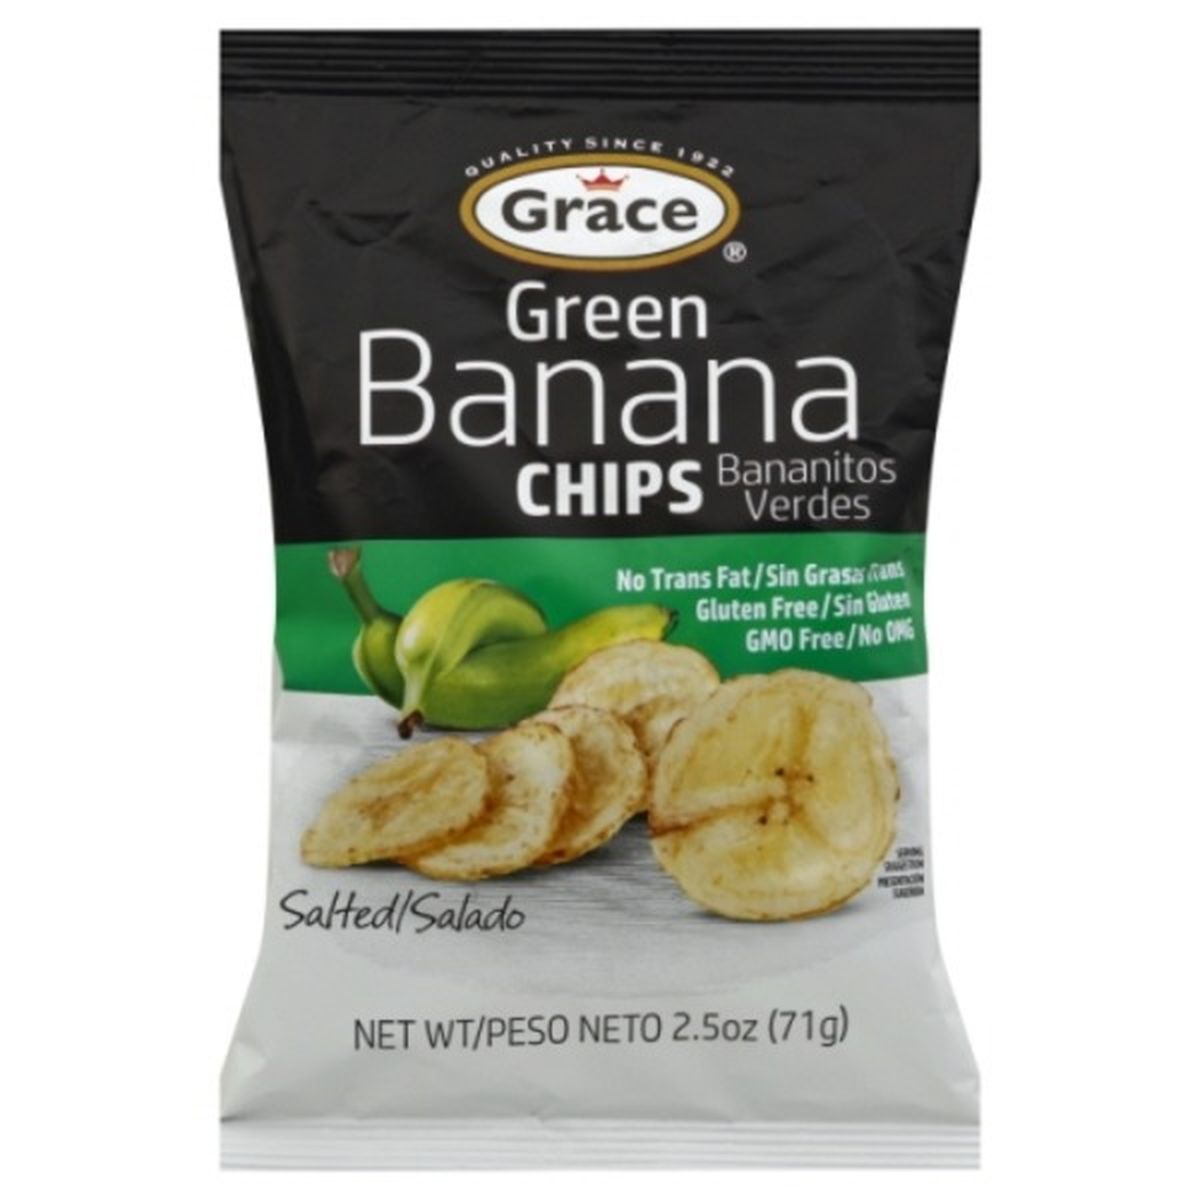 Calories in Grace Chips, Salted, Green Banana